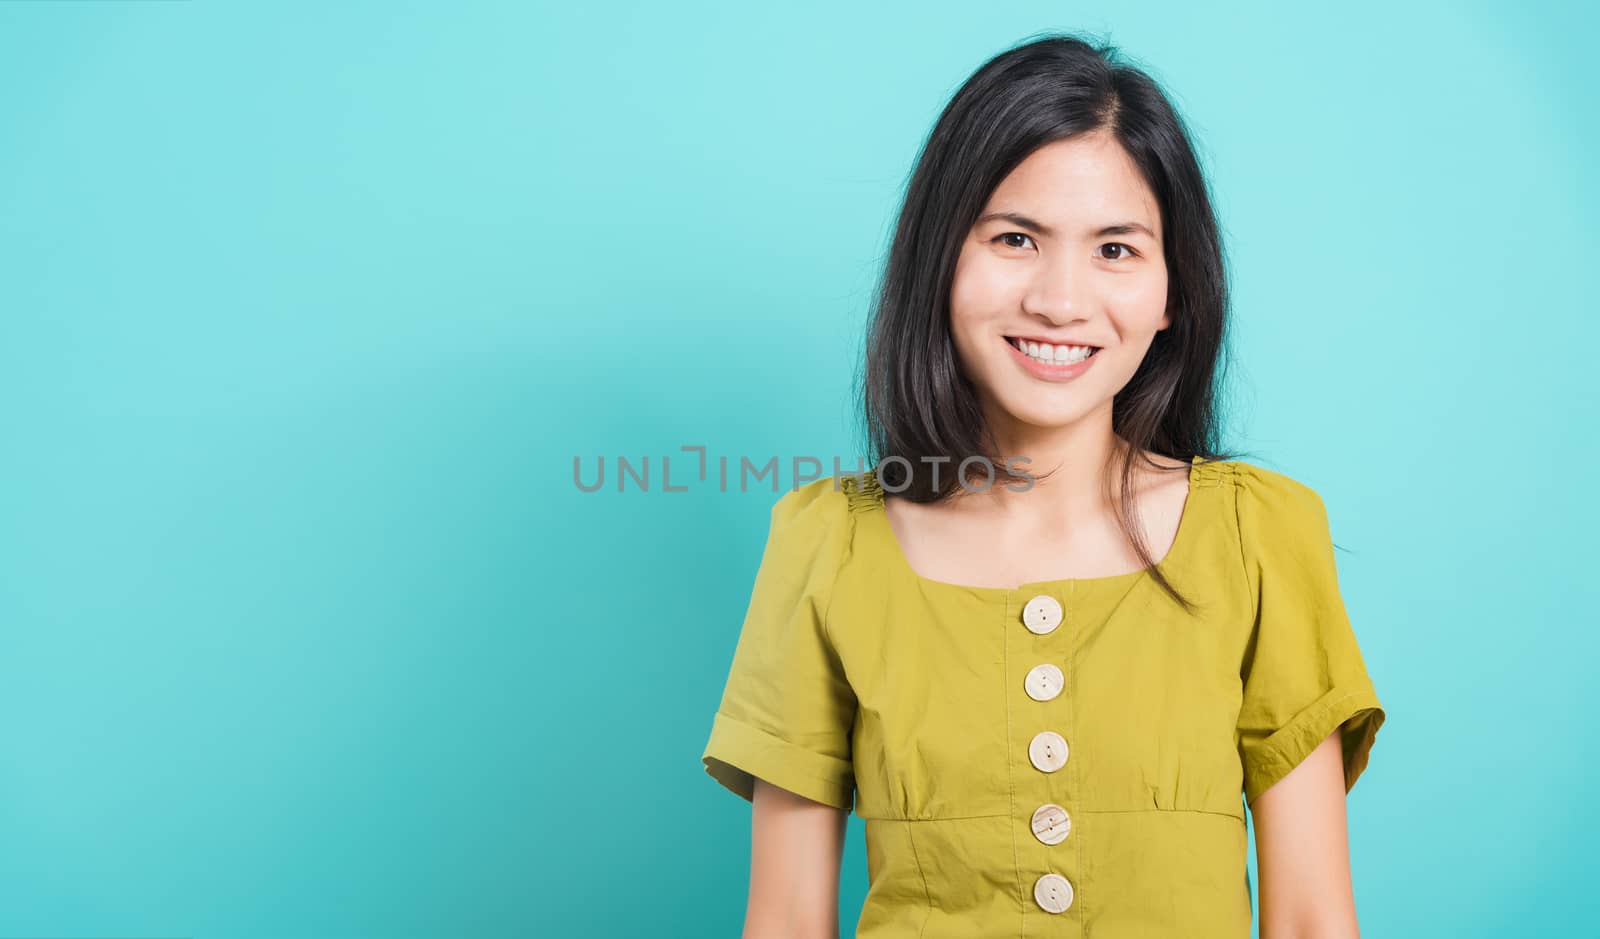 Portrait Asian beautiful young woman standing smile seeing white teeth, She looking at the camera, shoot photo in studio on blue background. There was a copy space to put text on the left-hand side.